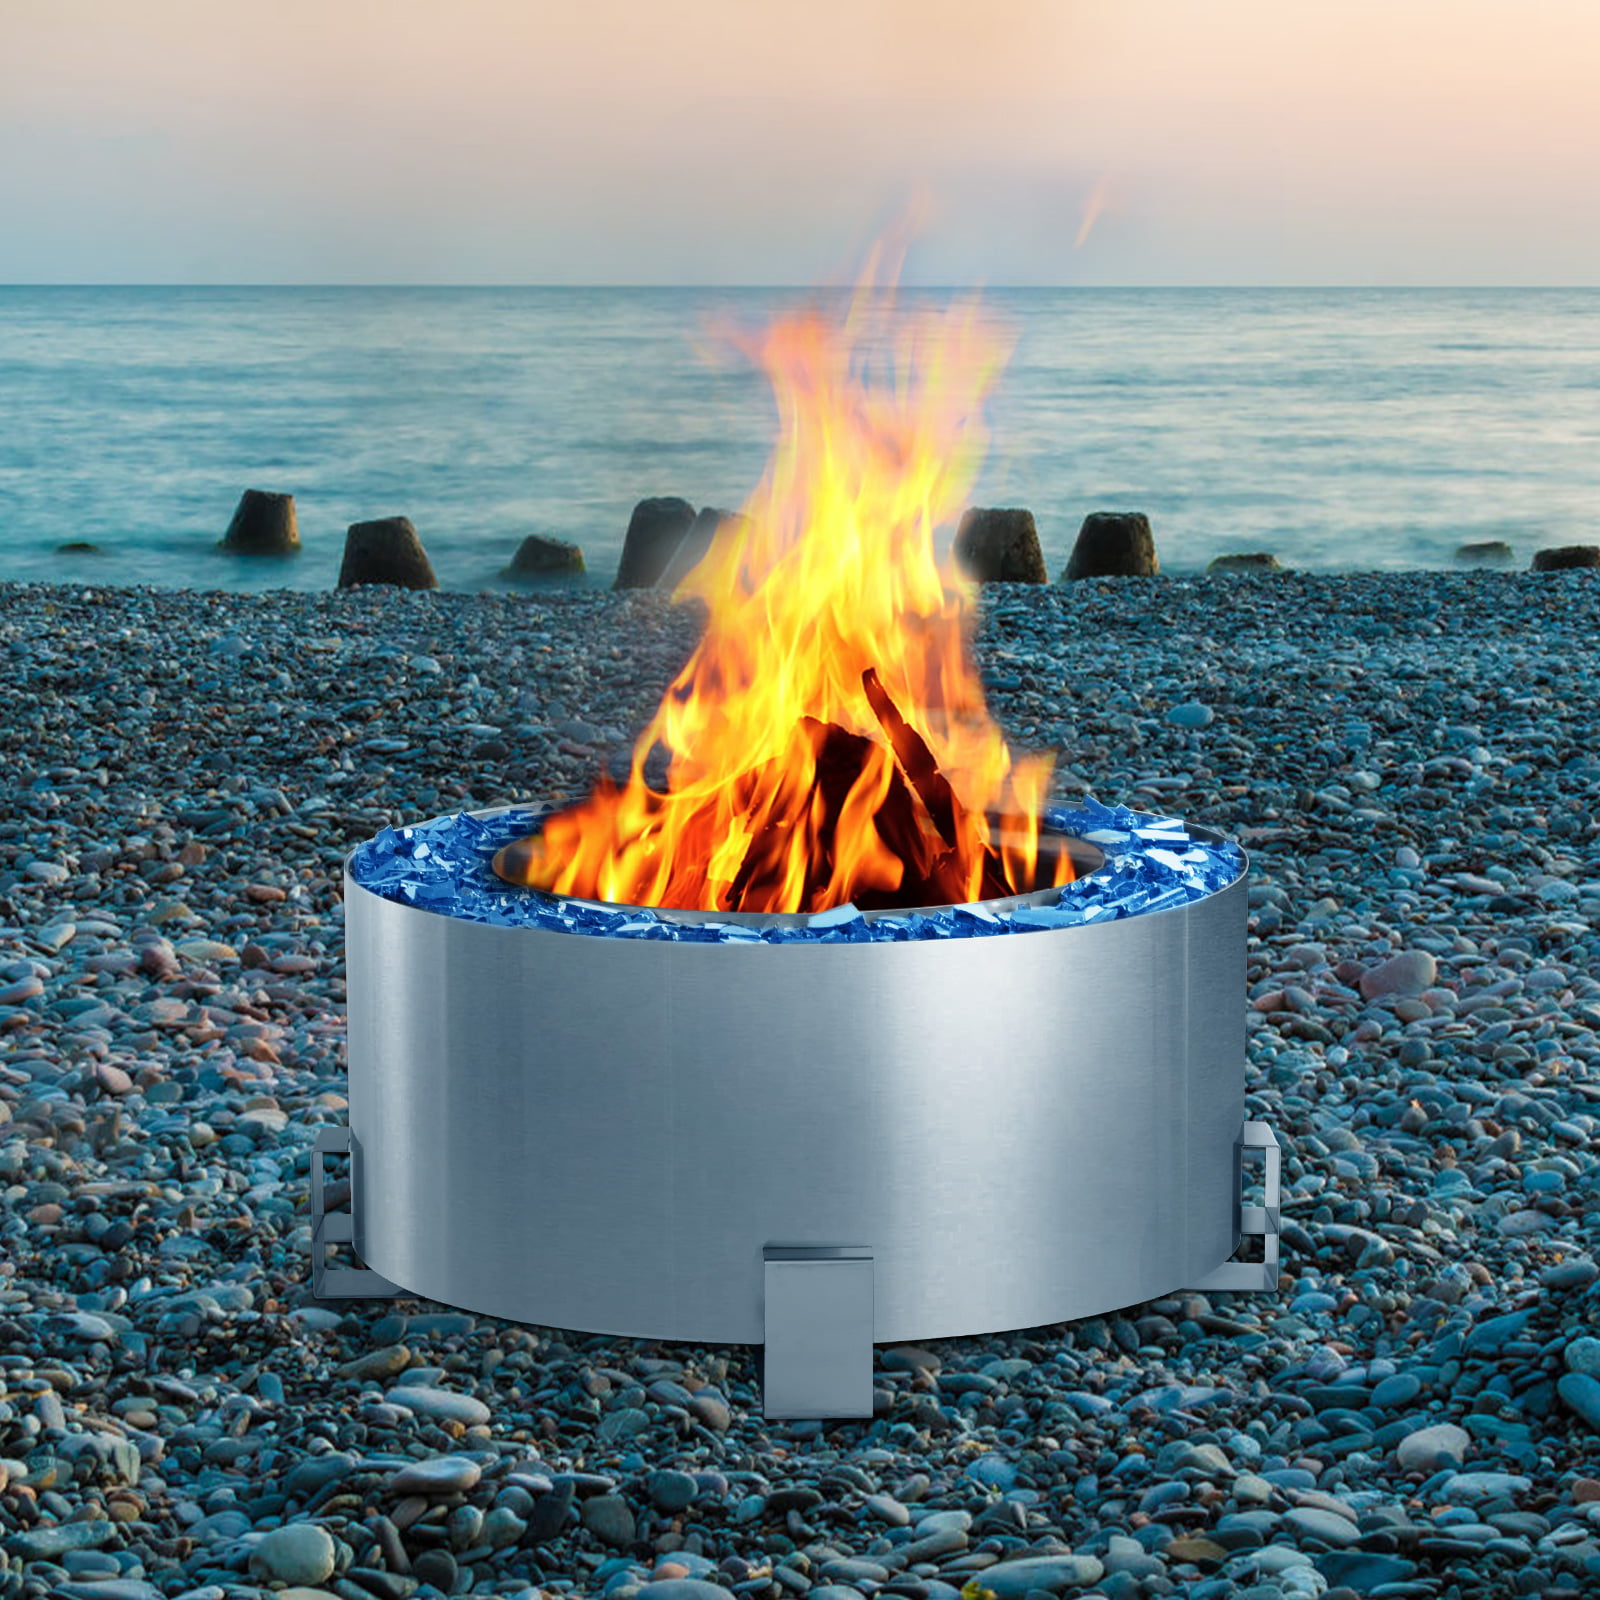 Danrelax 28 5 Fire Pit Outdoor, Are Smokeless Fire Pits Worth It